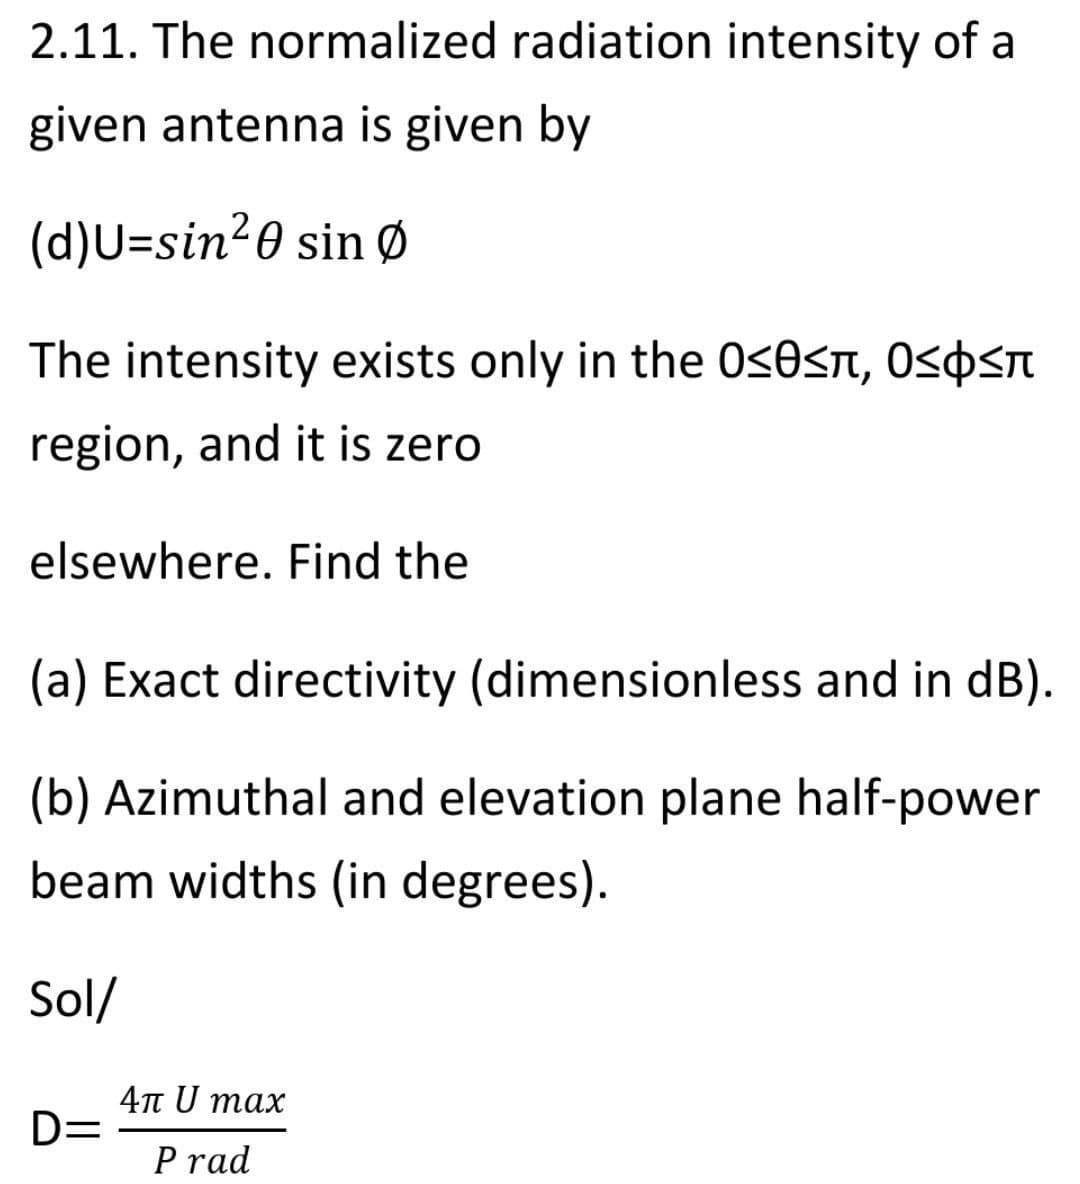 2.11. The normalized radiation intensity of a
given antenna is given by
(d)U=sin²0 sin Ø
The intensity exists only in the 0sOsn, Ospsn
region, and it is zero
elsewhere. Find the
(a) Exact directivity (dimensionless and in dB).
(b) Azimuthal and elevation plane half-power
beam widths (in degrees).
Sol/
4πυ max
D=
P rad
